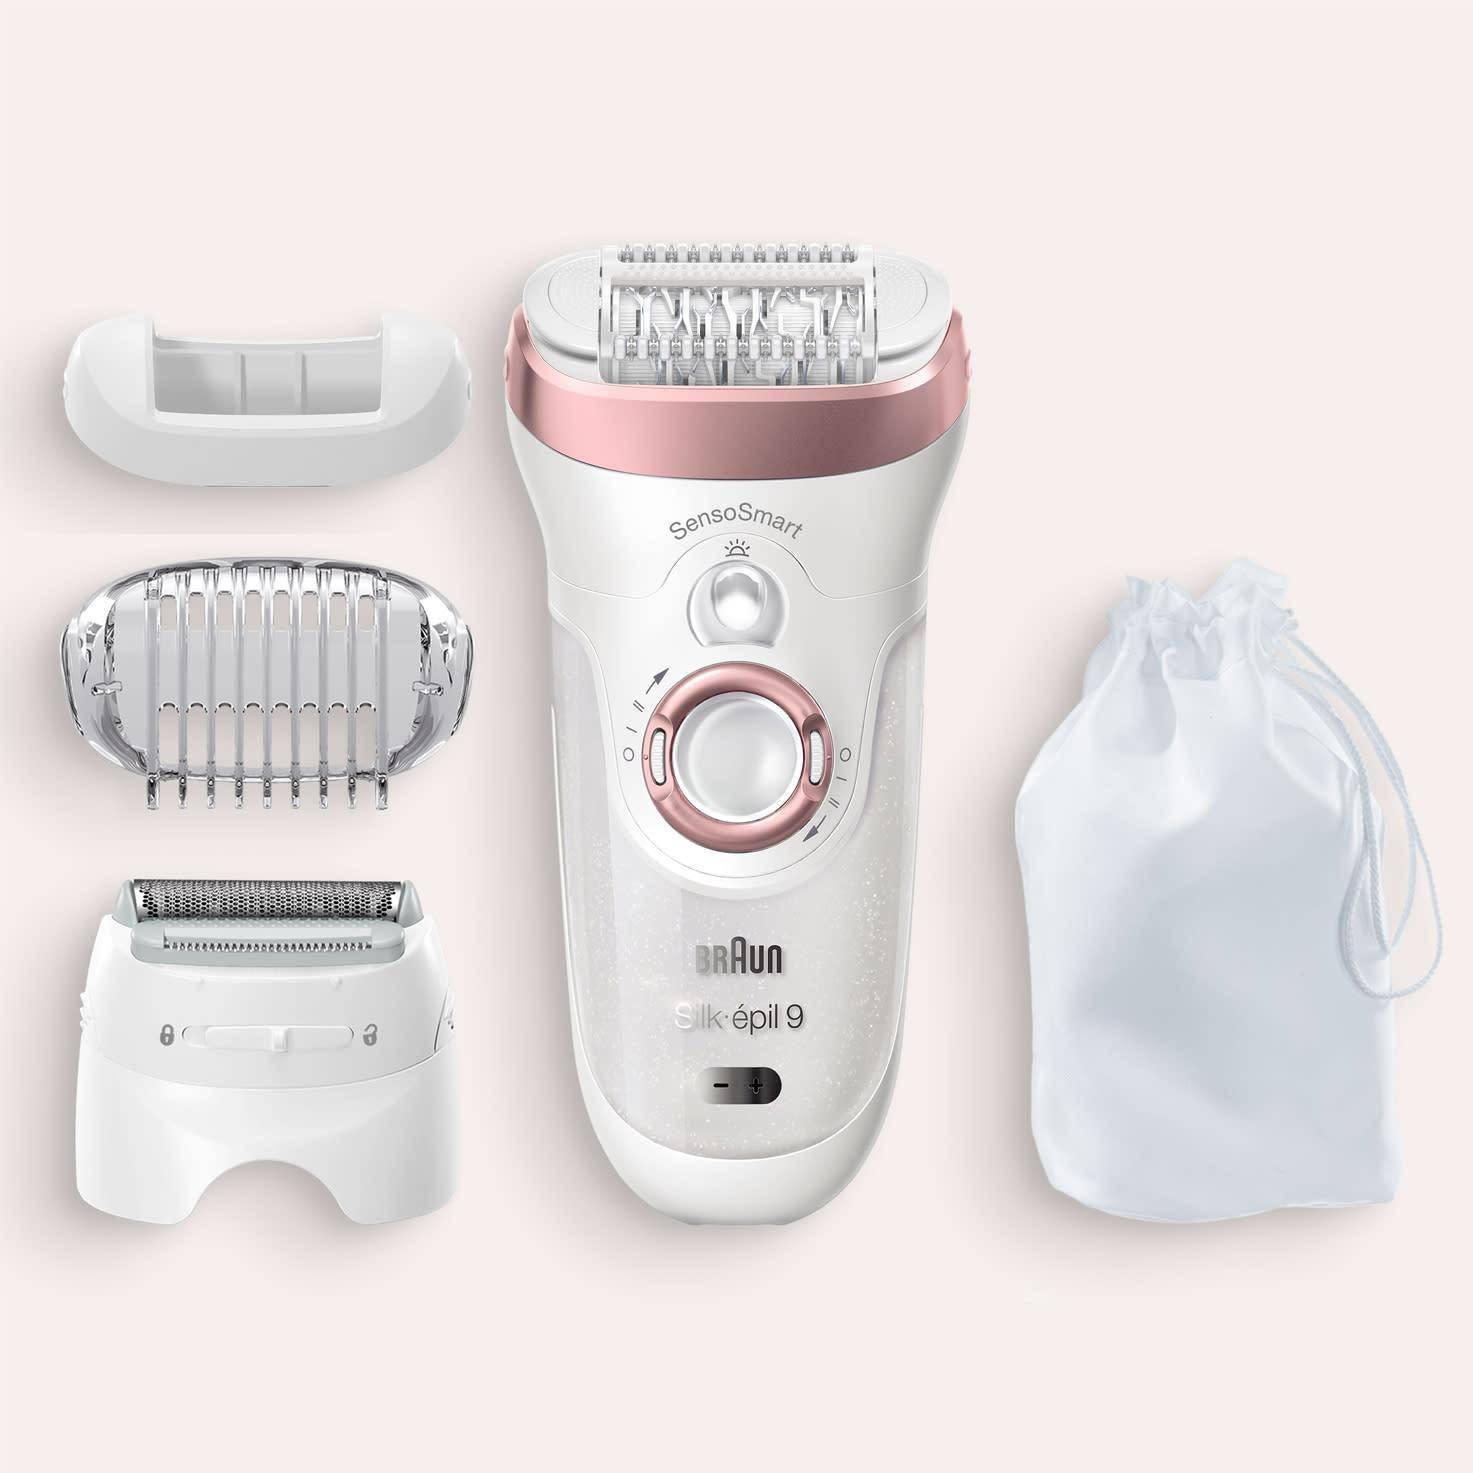 Braun Women's Silk-épil 9-720 Wet and Dry Epilator with 4 Extras - Pink/White - Healthxpress.ie